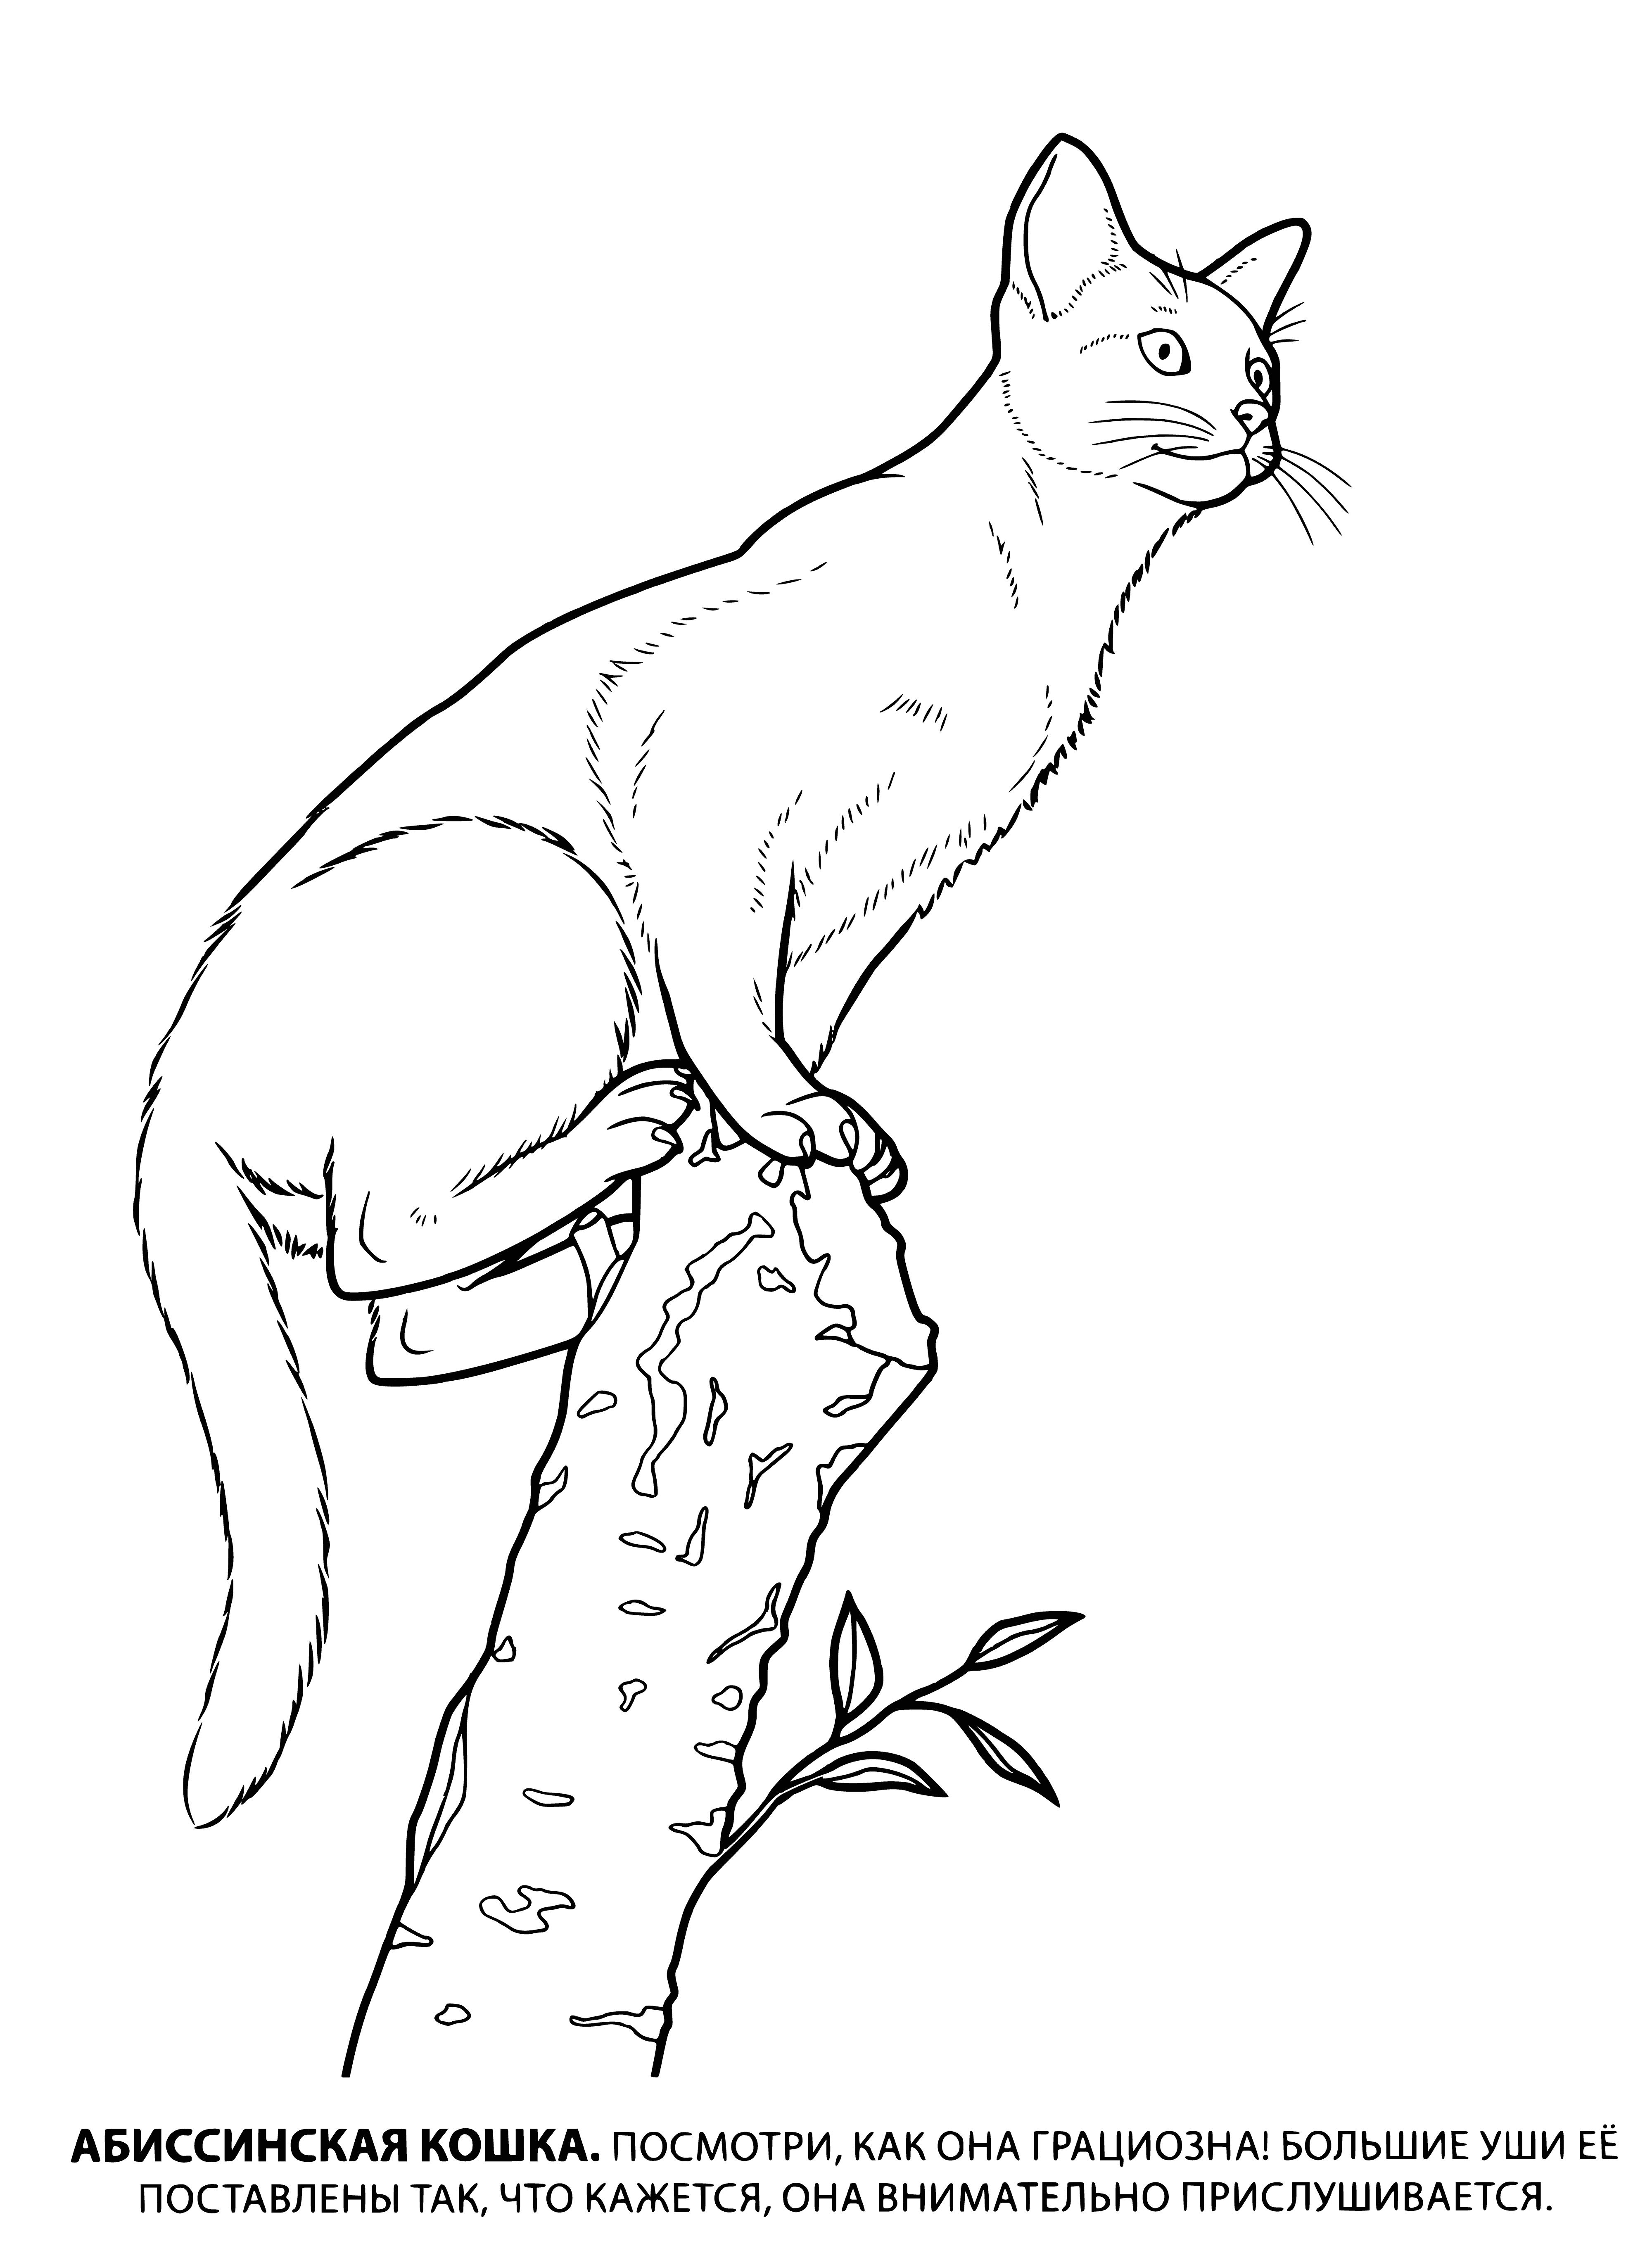 coloring page: This medium-sized, short-haired cat has a pointy-eared, wedge-shaped head and a ruddy coat with dark brown stripes.